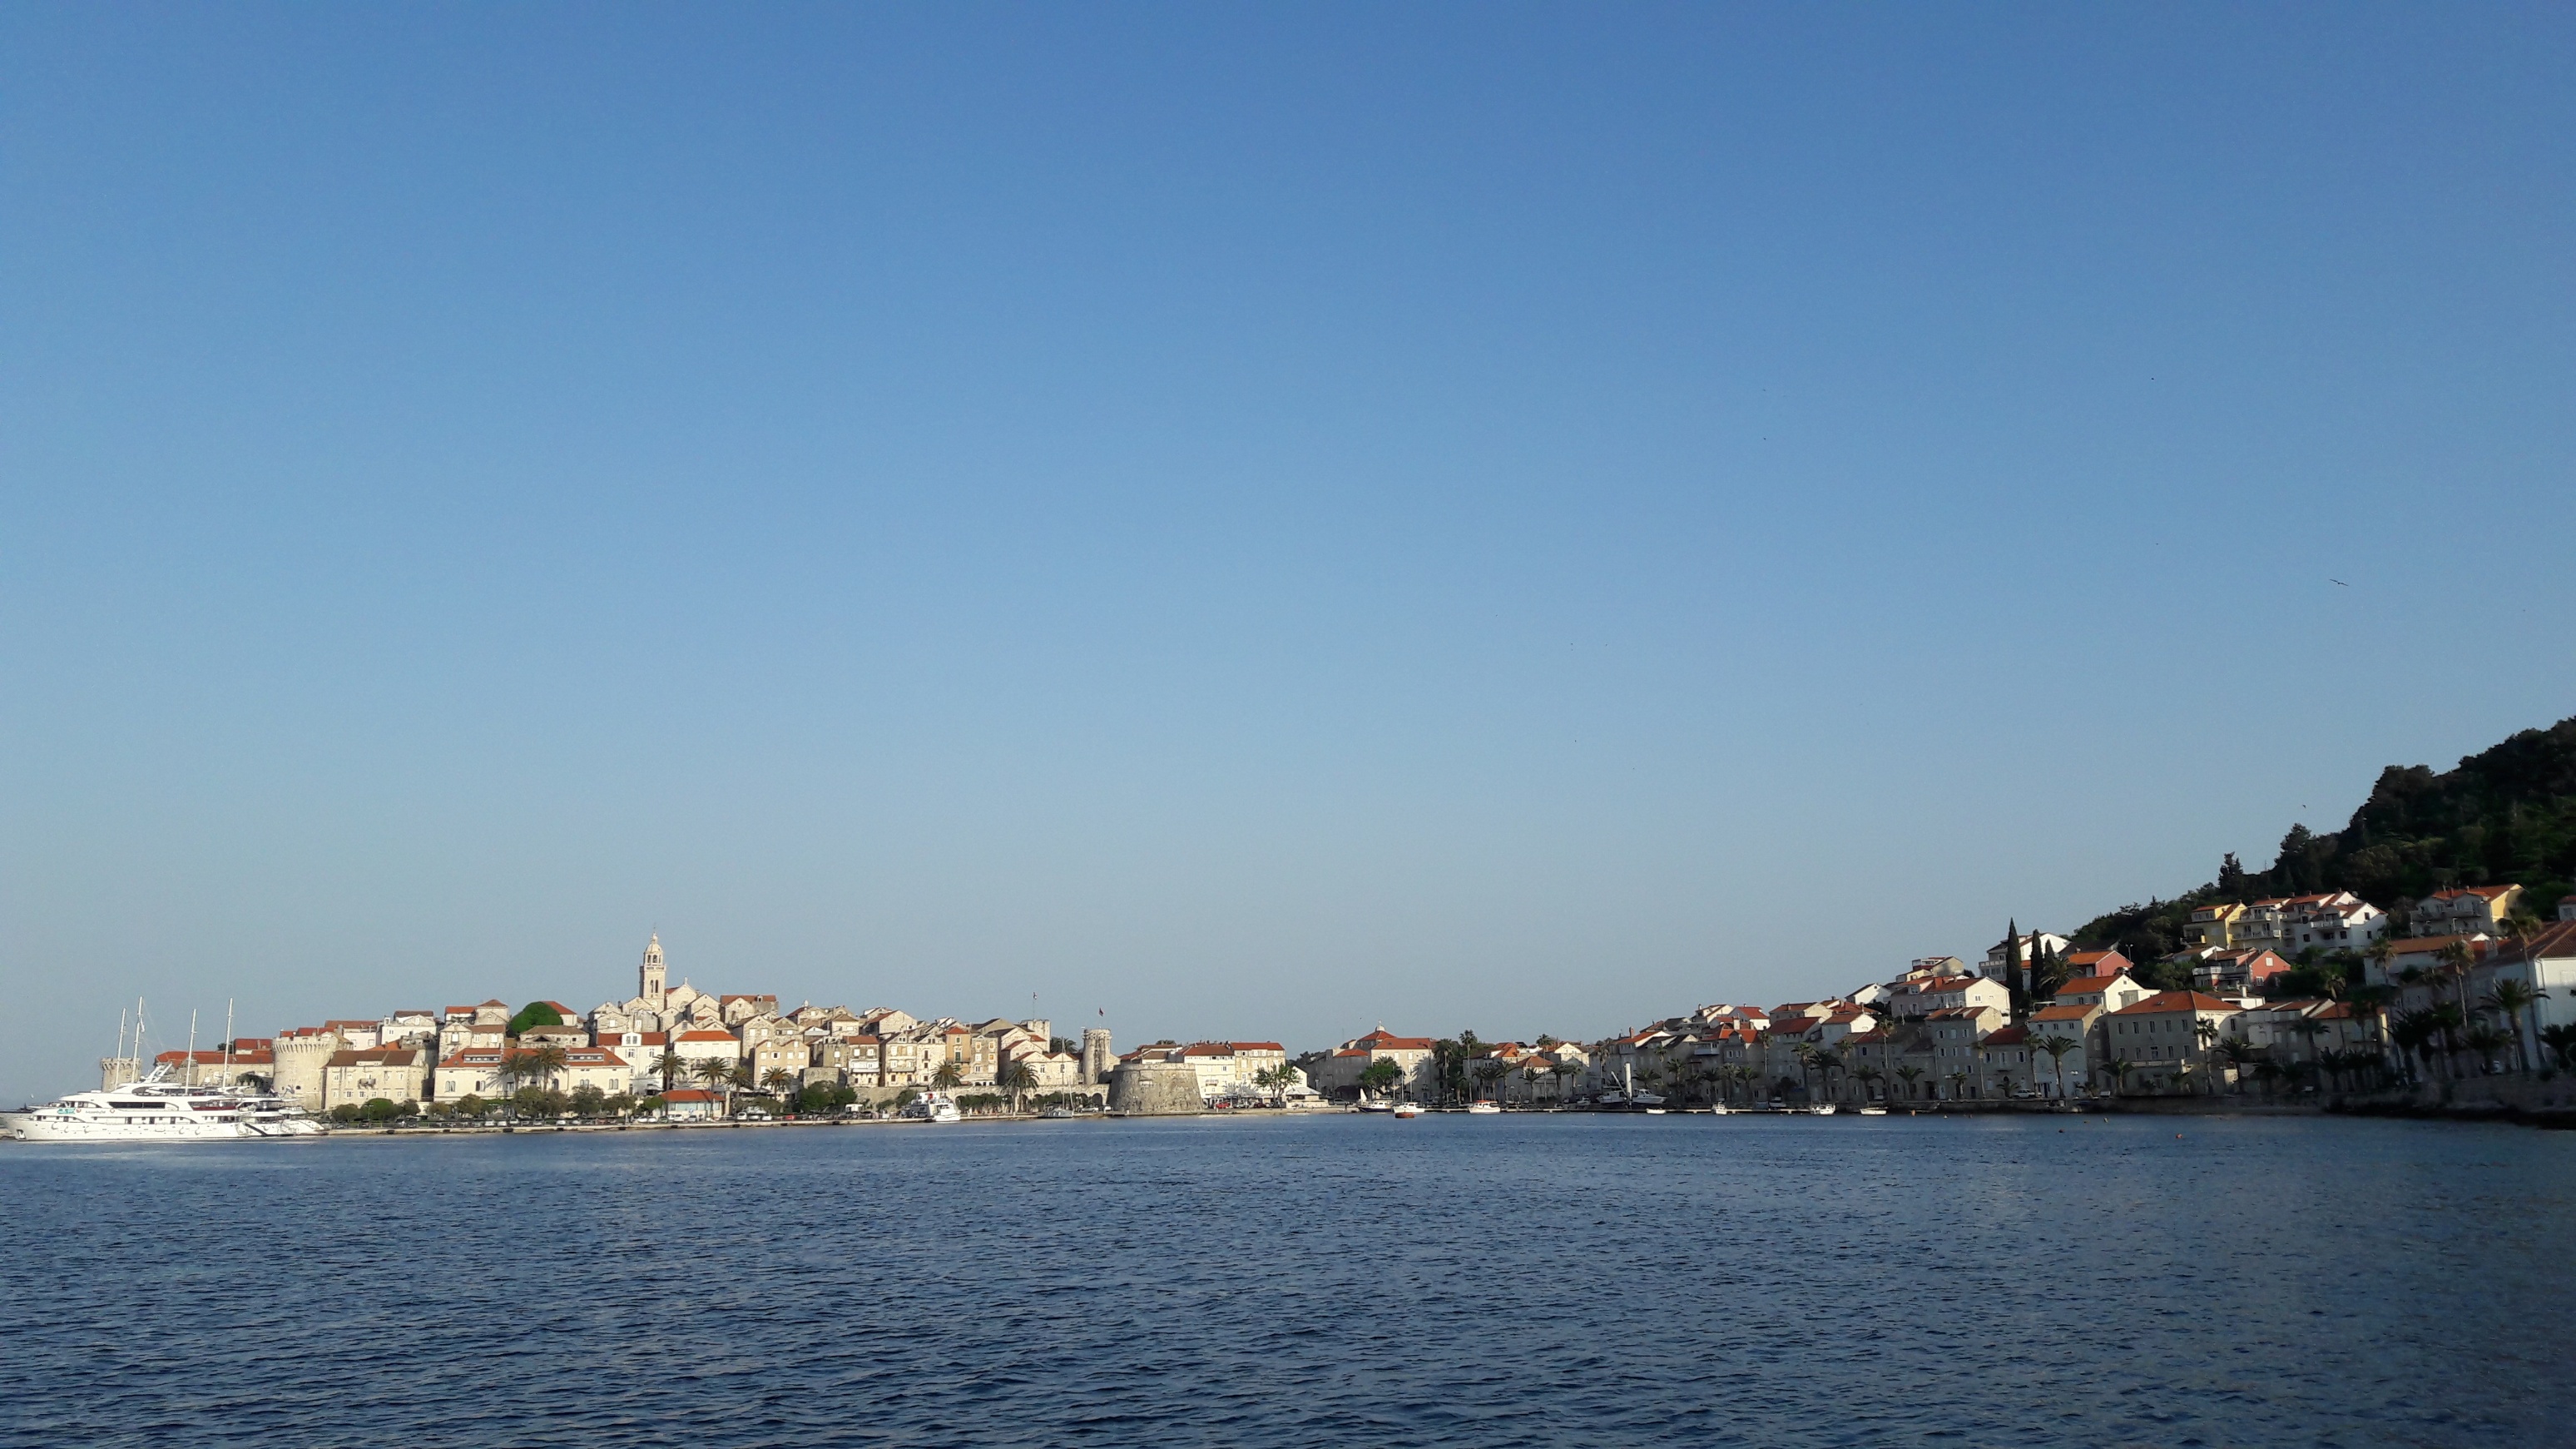 Korcula from the sea side